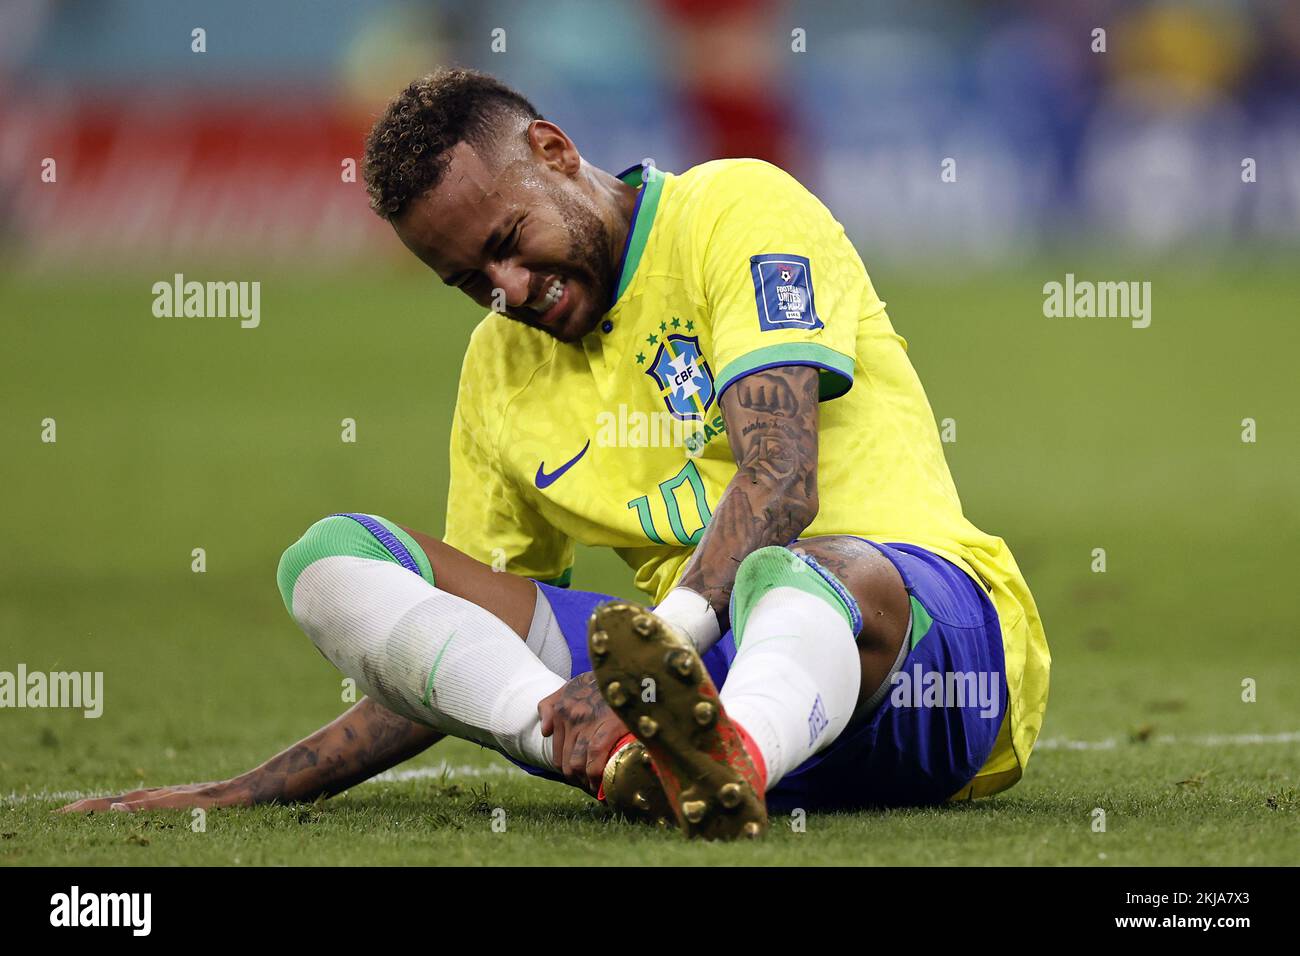 LUSAIL CITY - Neymar of Brazil has pain in his right ankle during the FIFA World Cup Qatar 2022 group G match between Brazil and Serbia at Lusail Stadium on November 24, 2022 in Lusail City, Qatar. AP | Dutch Height | MAURICE OF STONE Credit: ANP/Alamy Live News Stock Photo